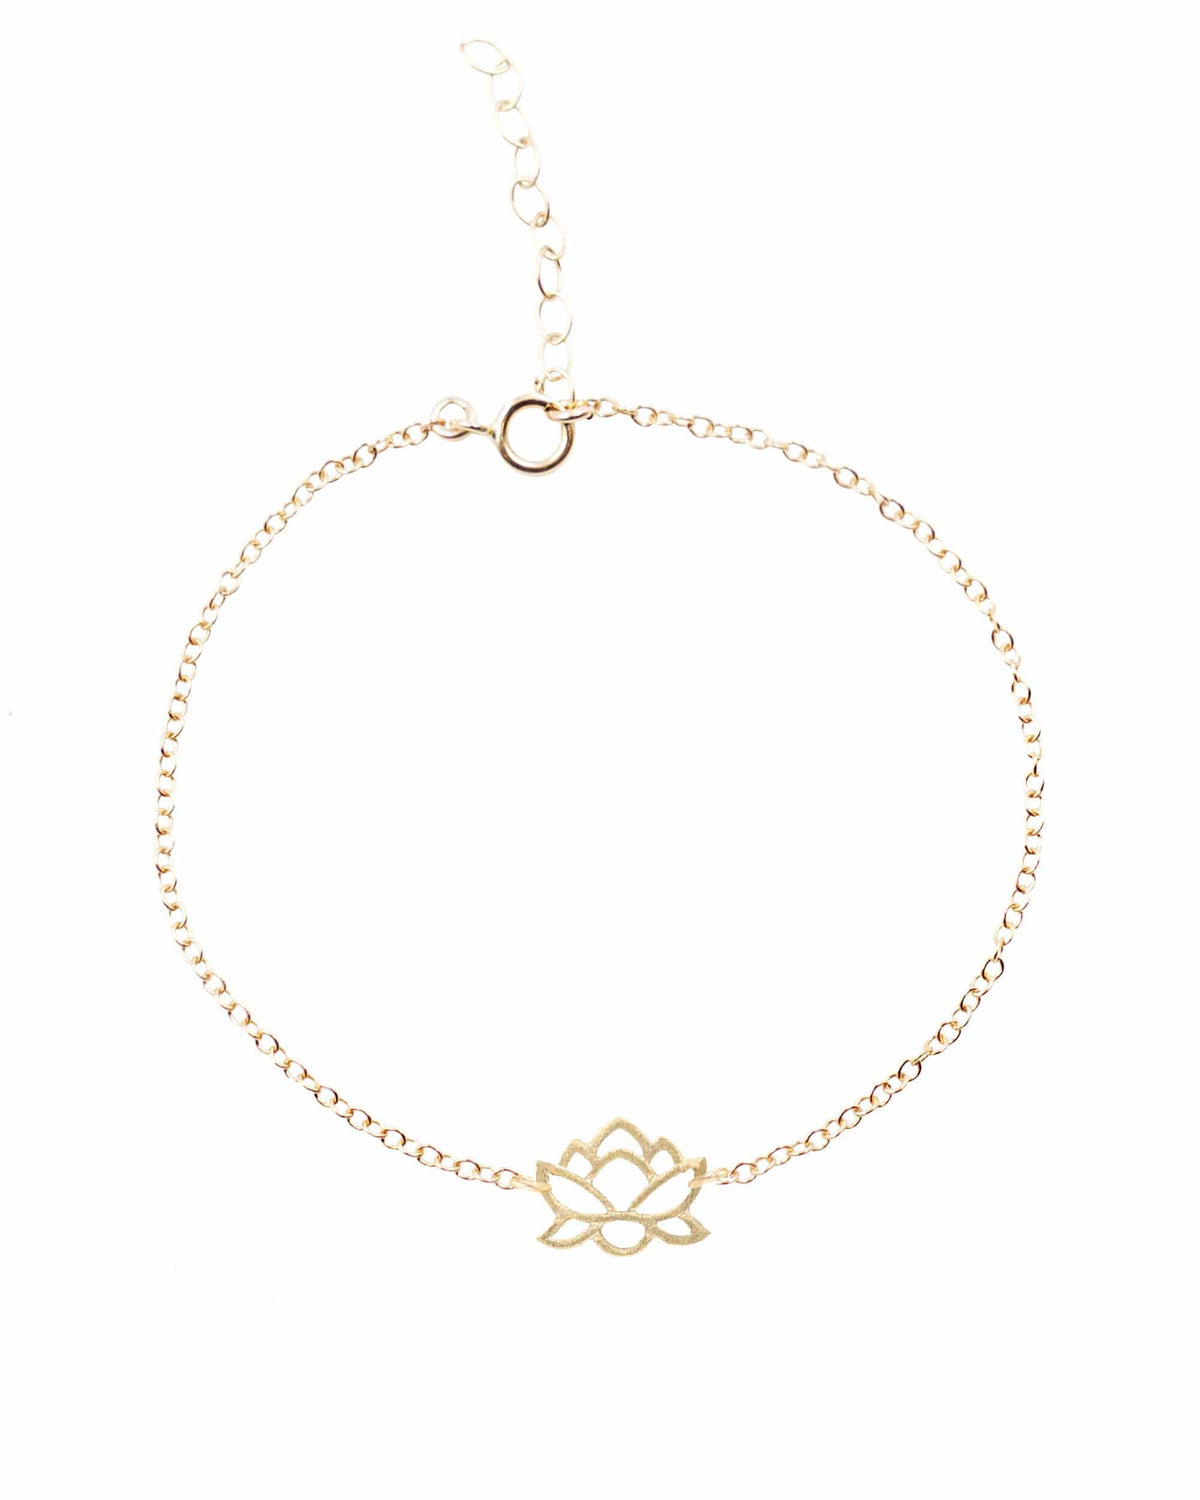 Rebirth Bracelet Dainty Bracelet Rebirth Bracelet | Lotus Necklace | Vermeil Gold | Carded Jewelry | MaeMae Jewelry